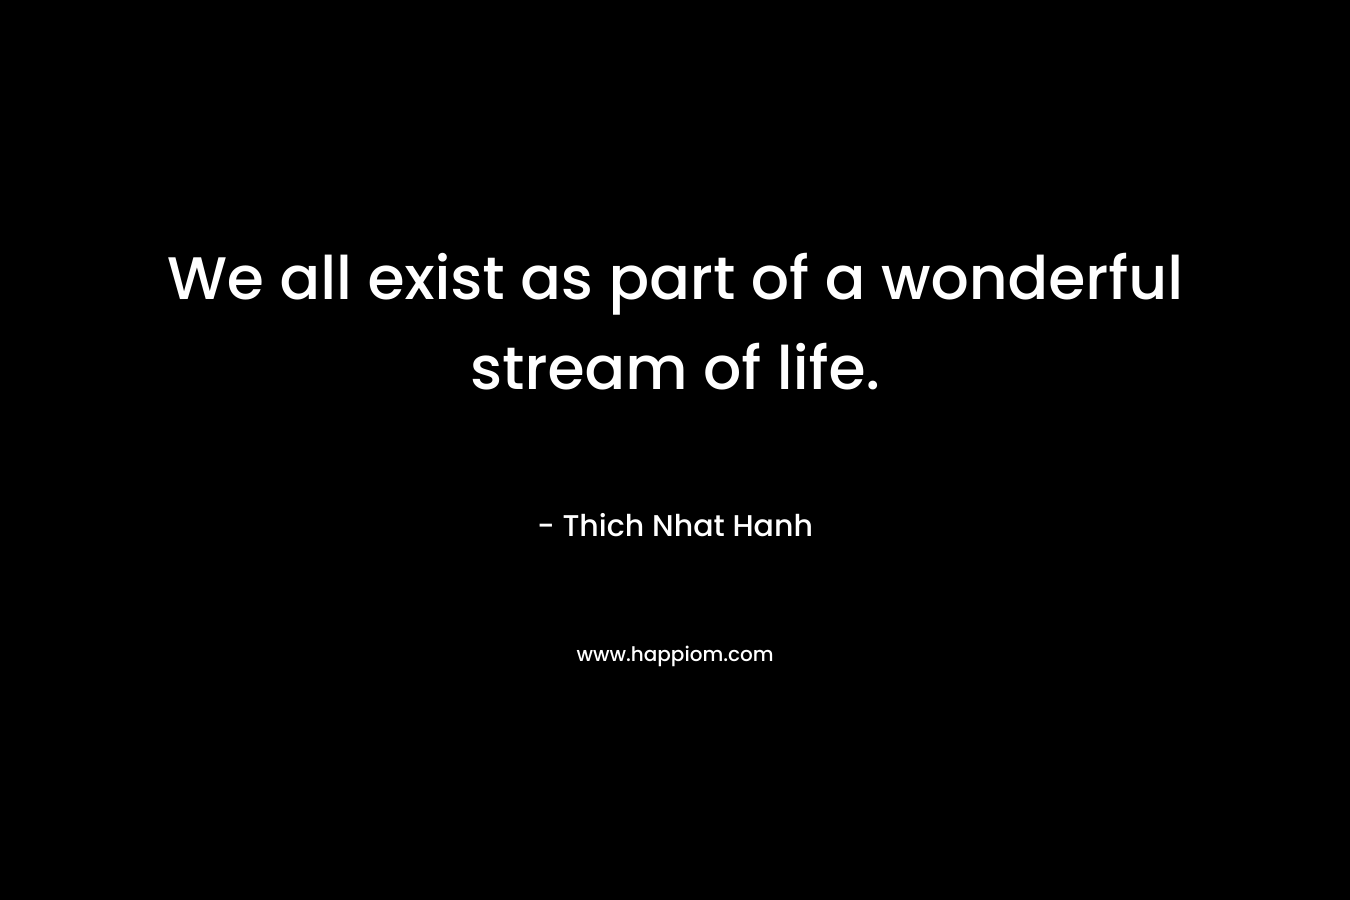 We all exist as part of a wonderful stream of life. – Thich Nhat Hanh